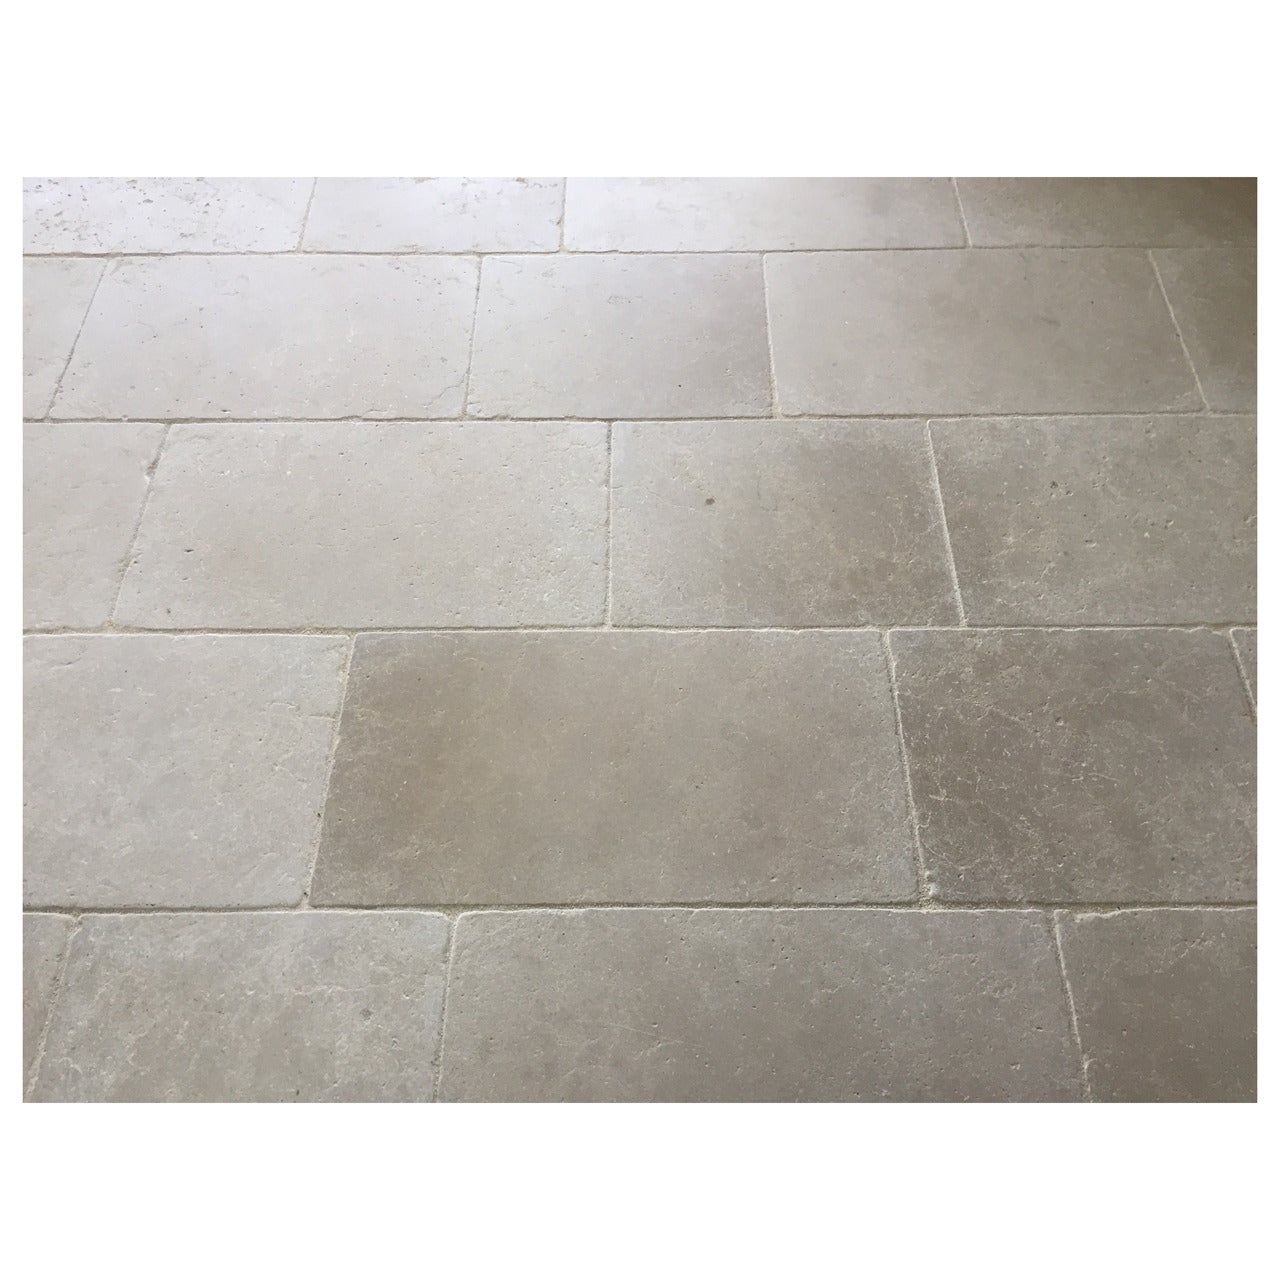 Parisian Style Flooring in Pure and Solid Limestone, Handcrafted from France For Sale